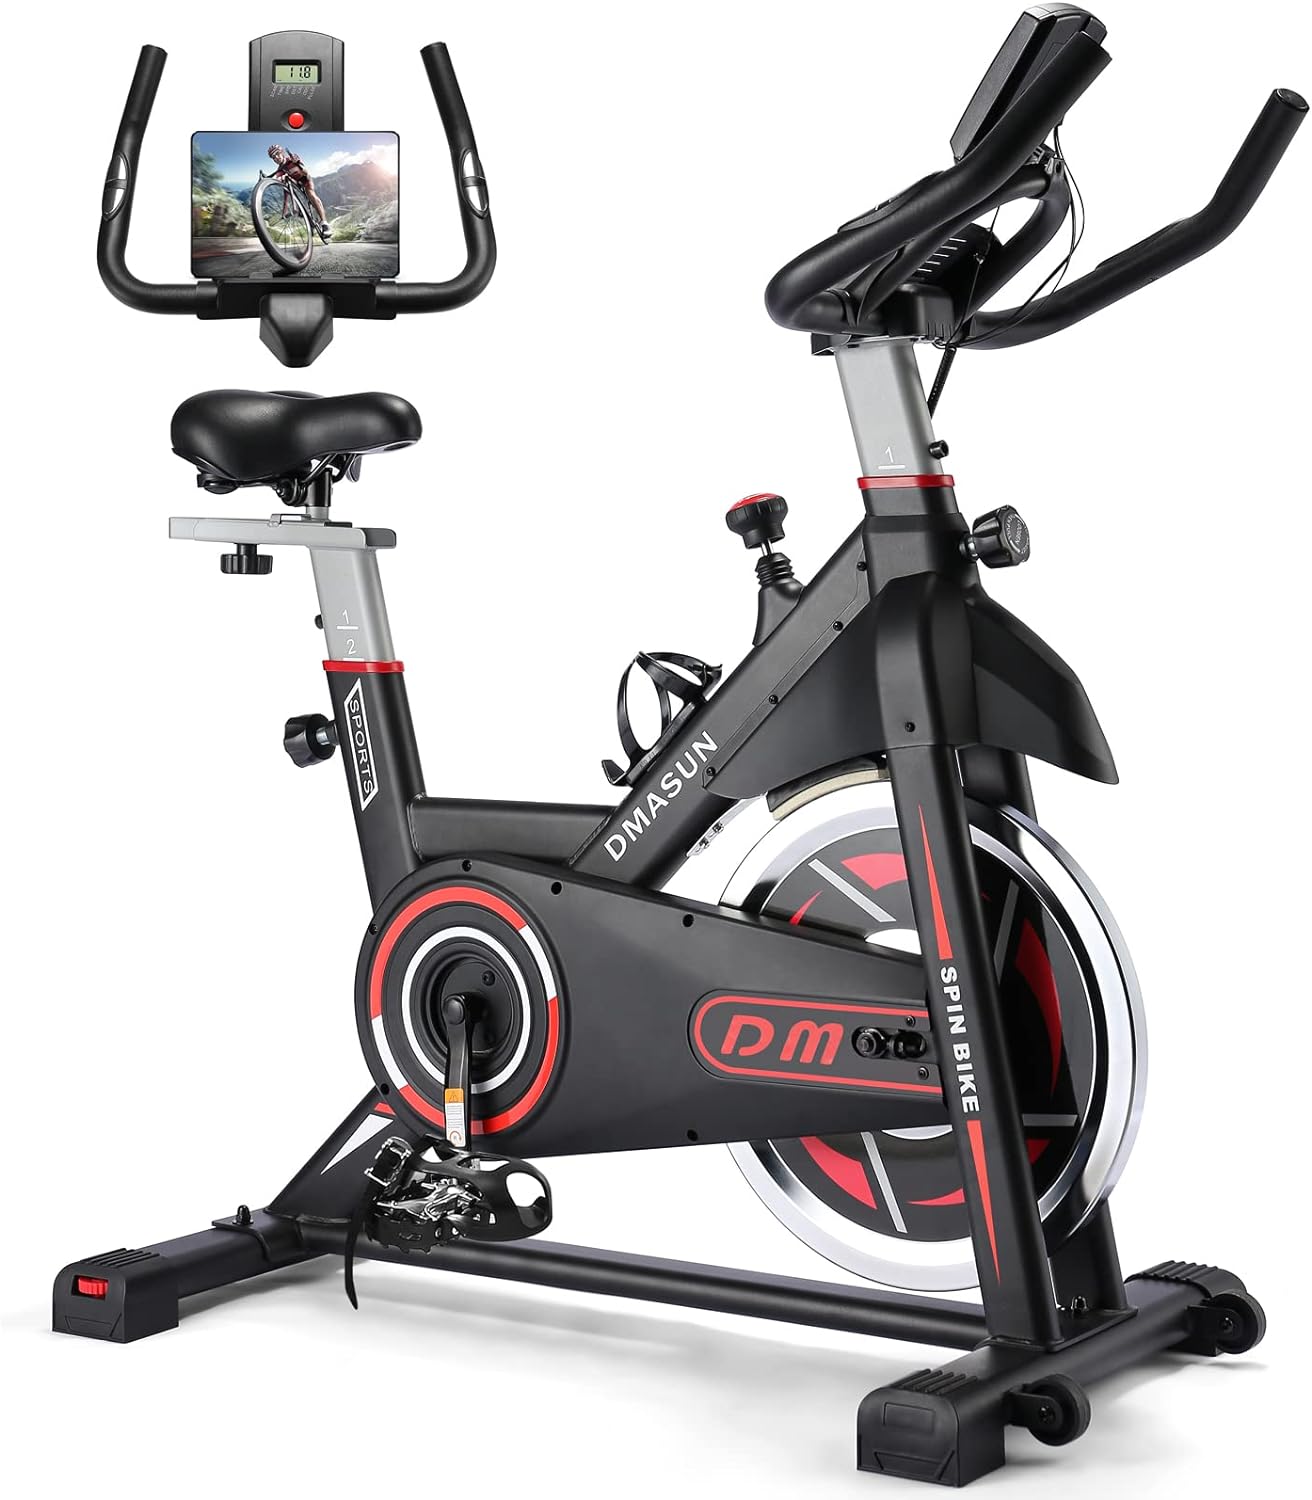 Best Fitness Bike: Top 5 Picks for Your Home Workout Routine